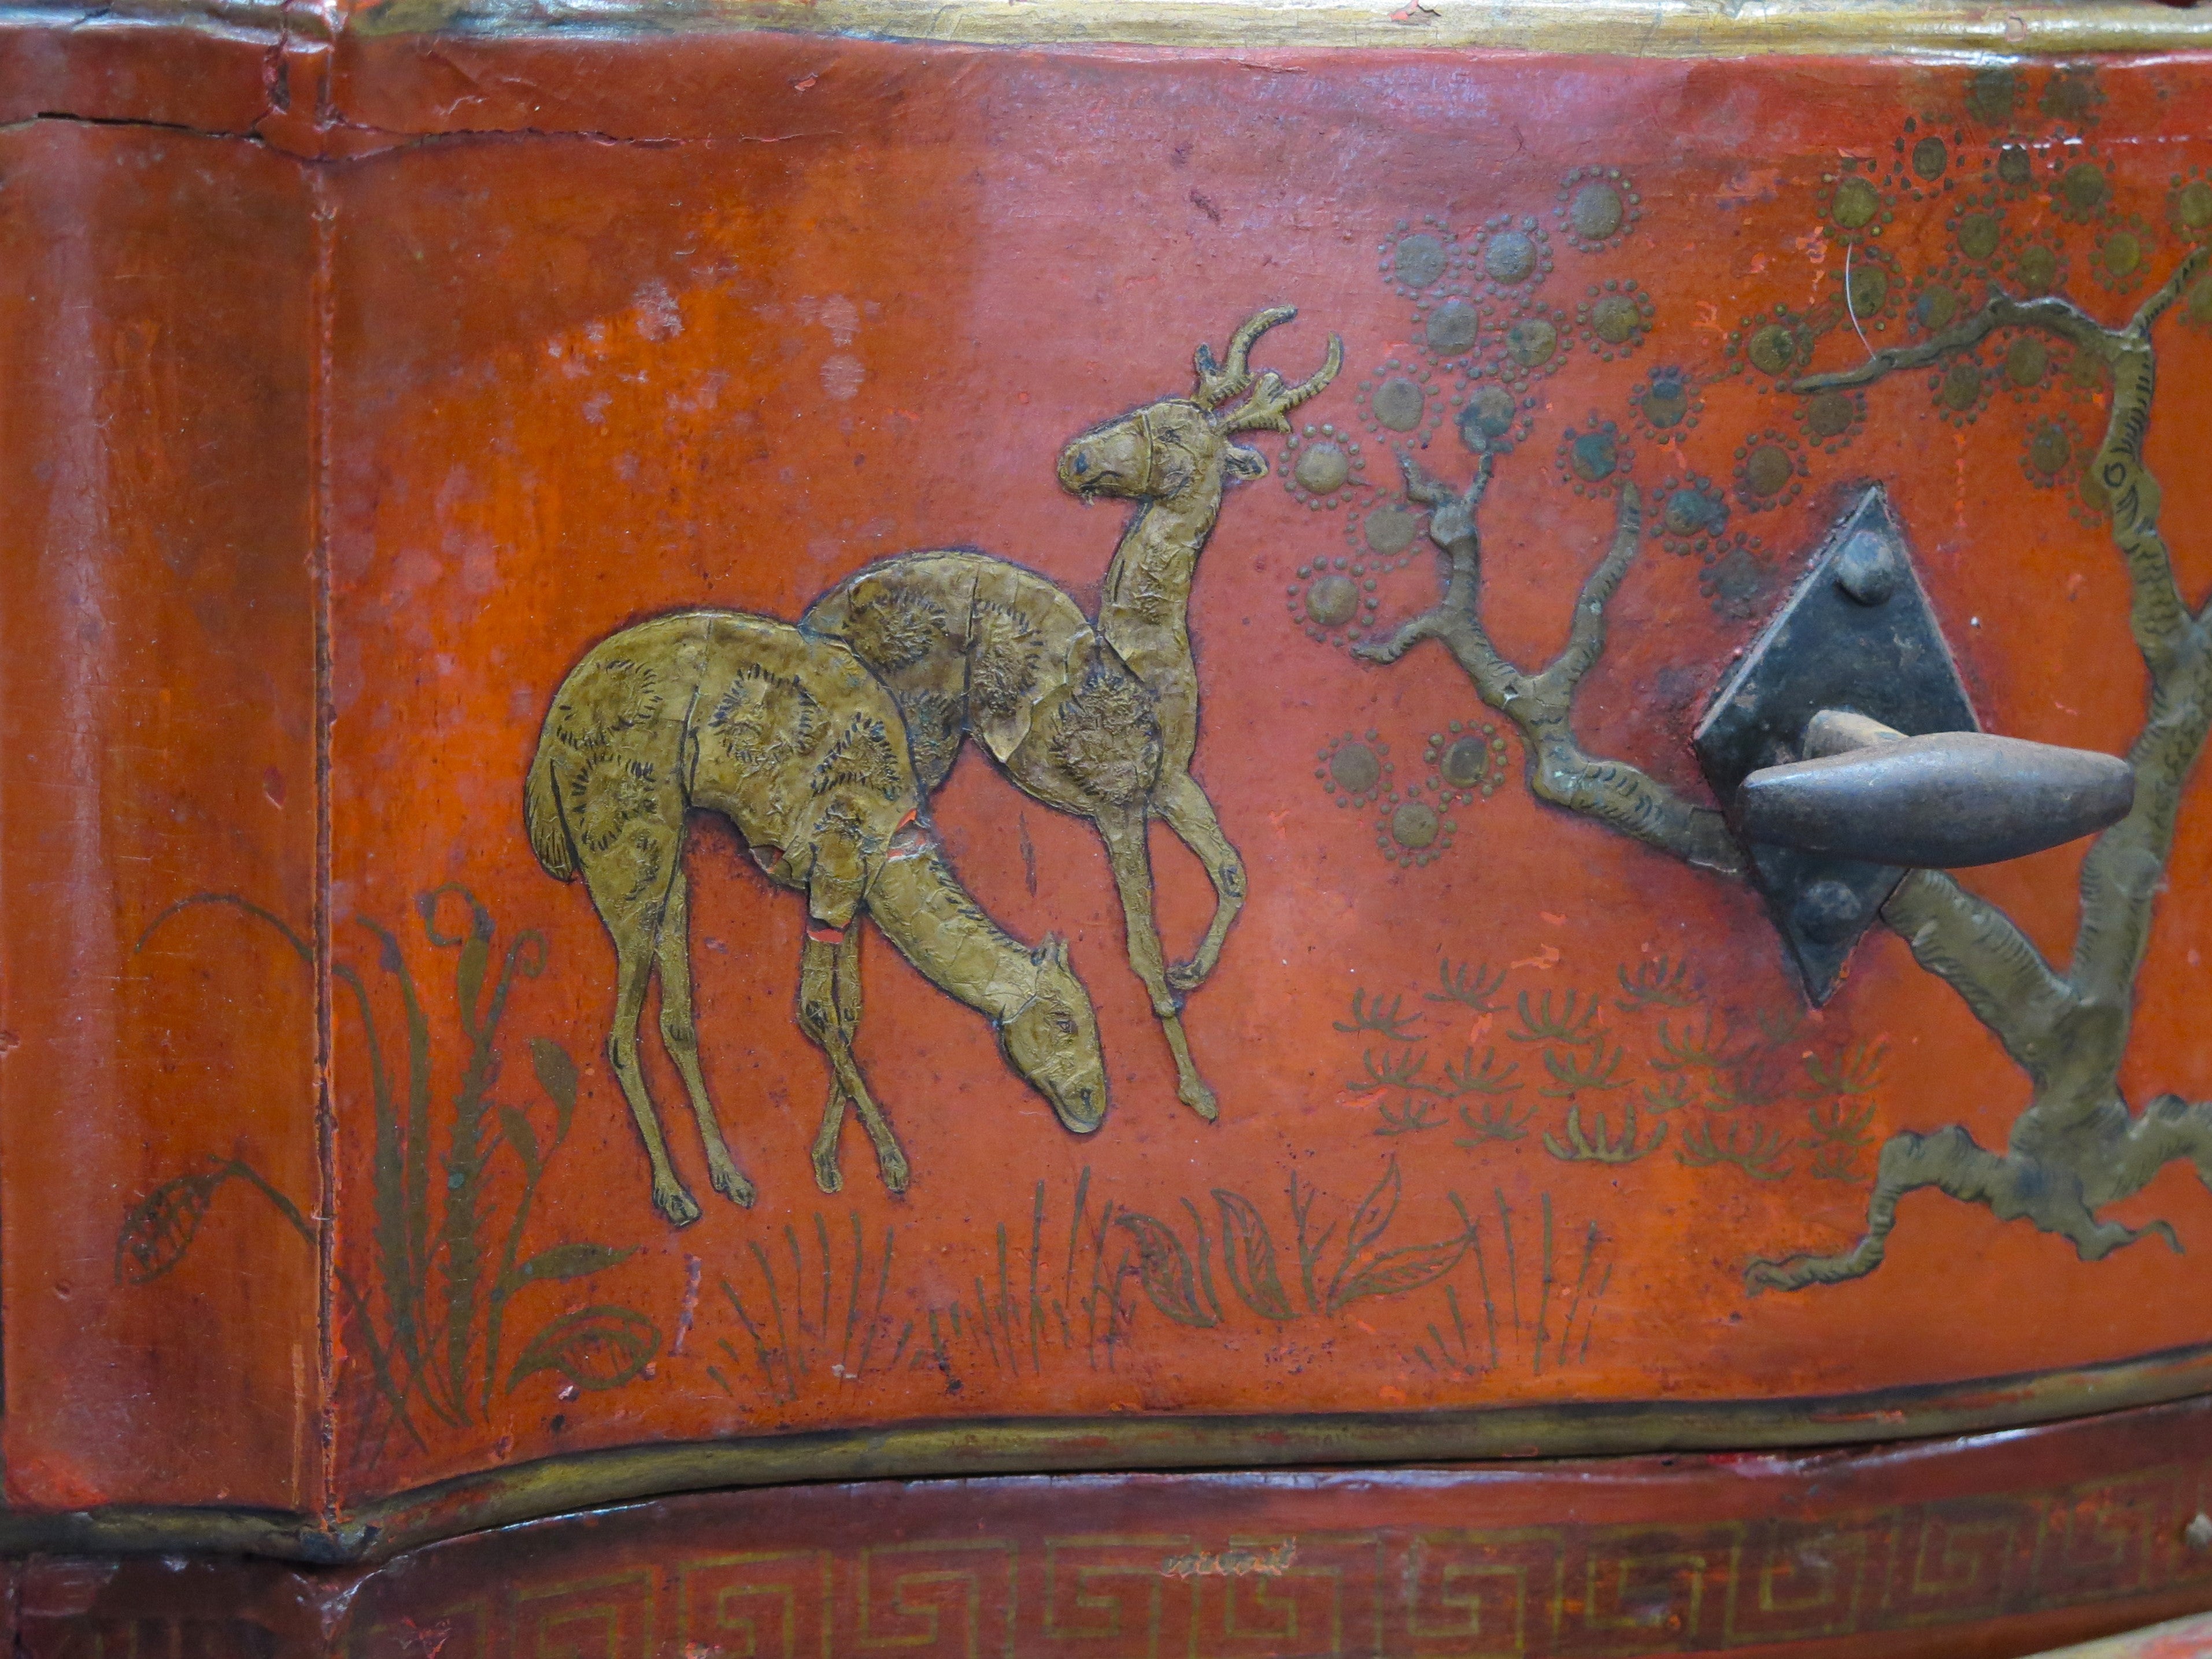 A Continental Red Chinoiserie Decorated Chest